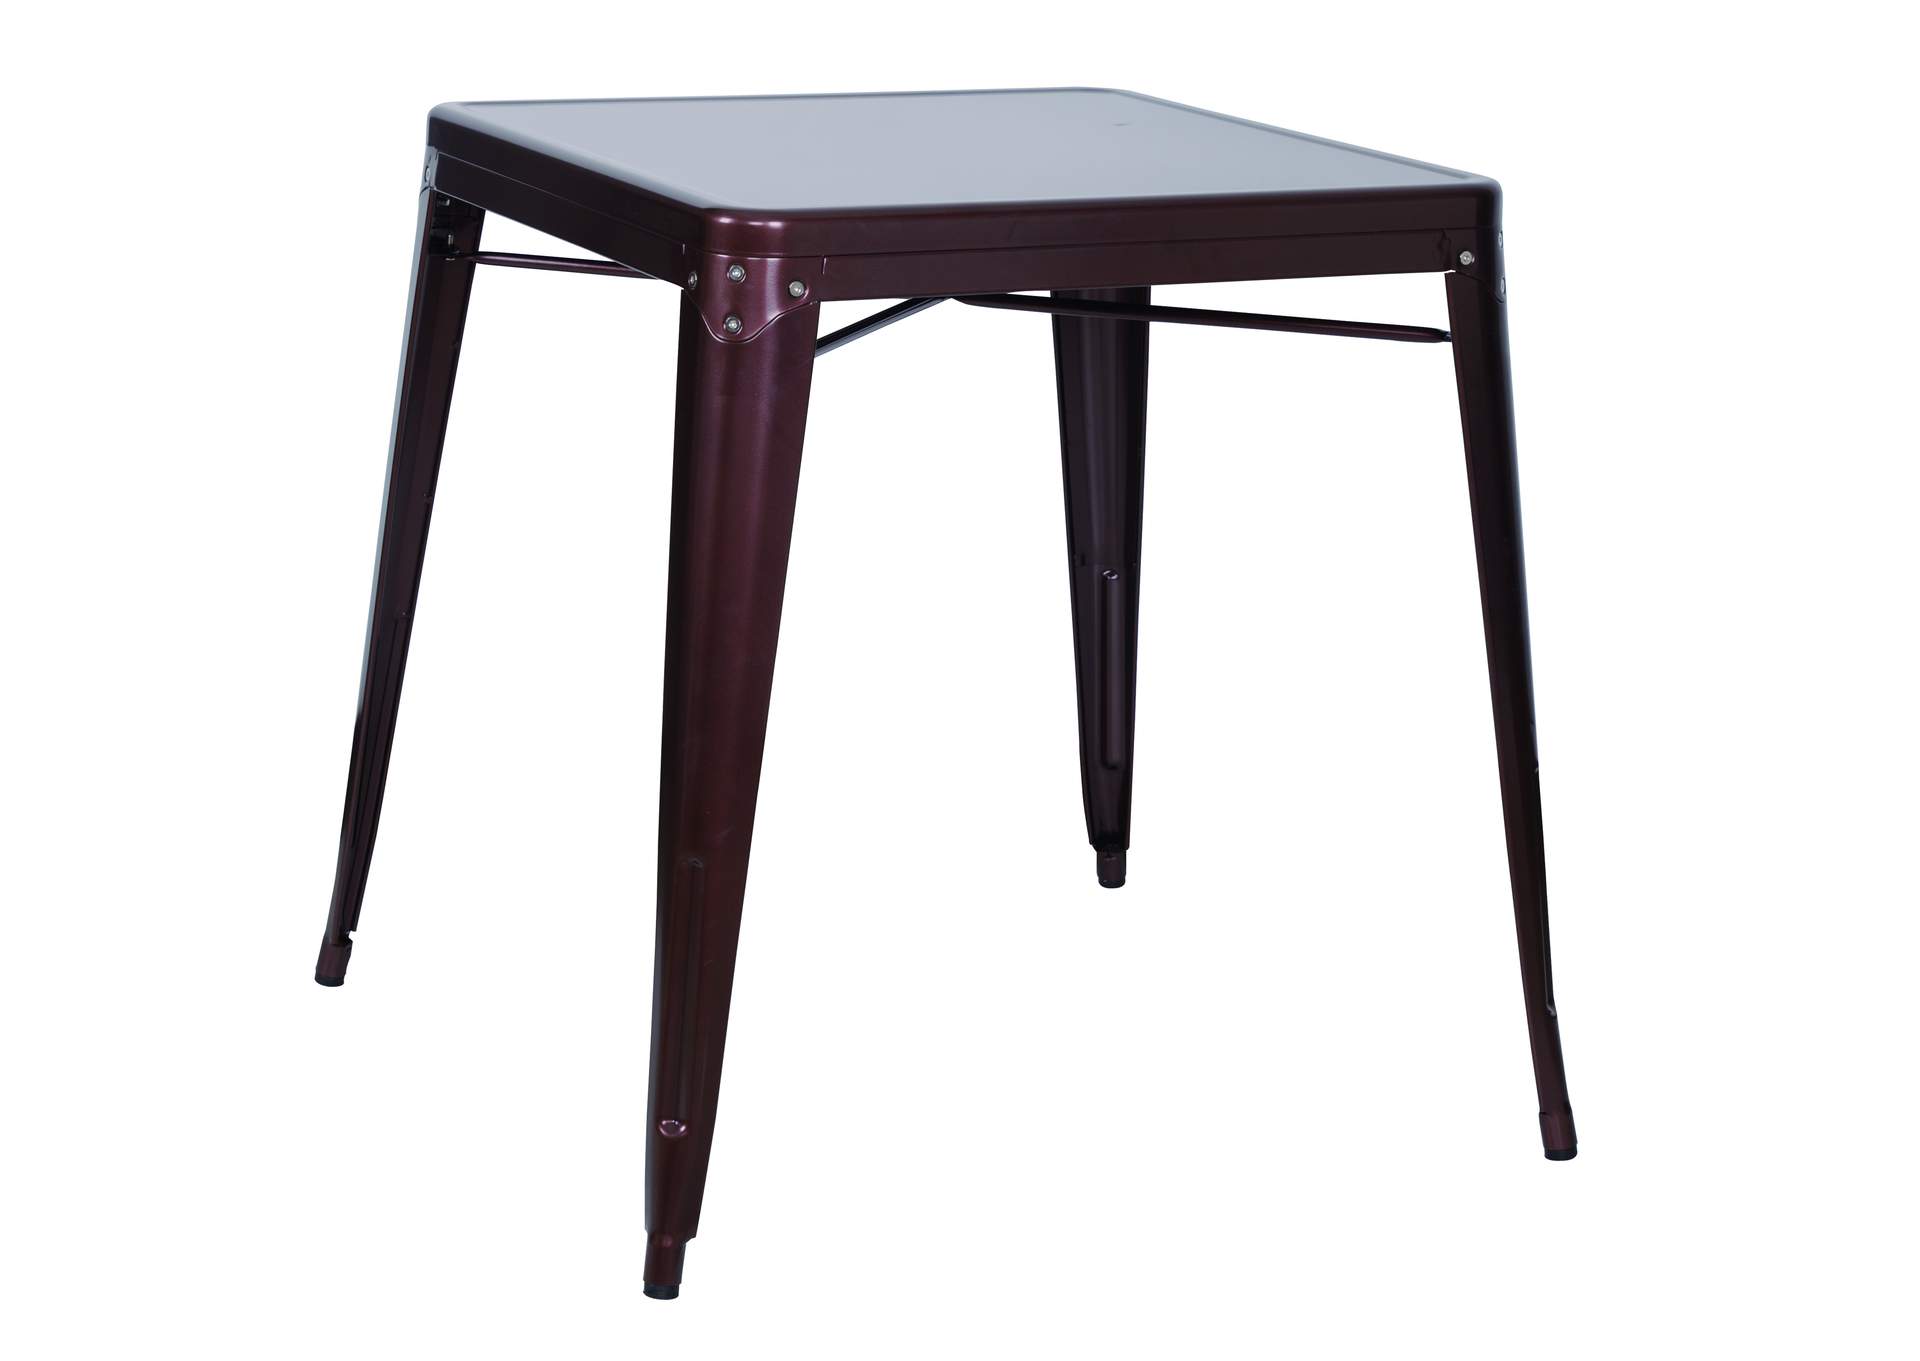 Galvanized Steel Dining Table,Chintaly Imports